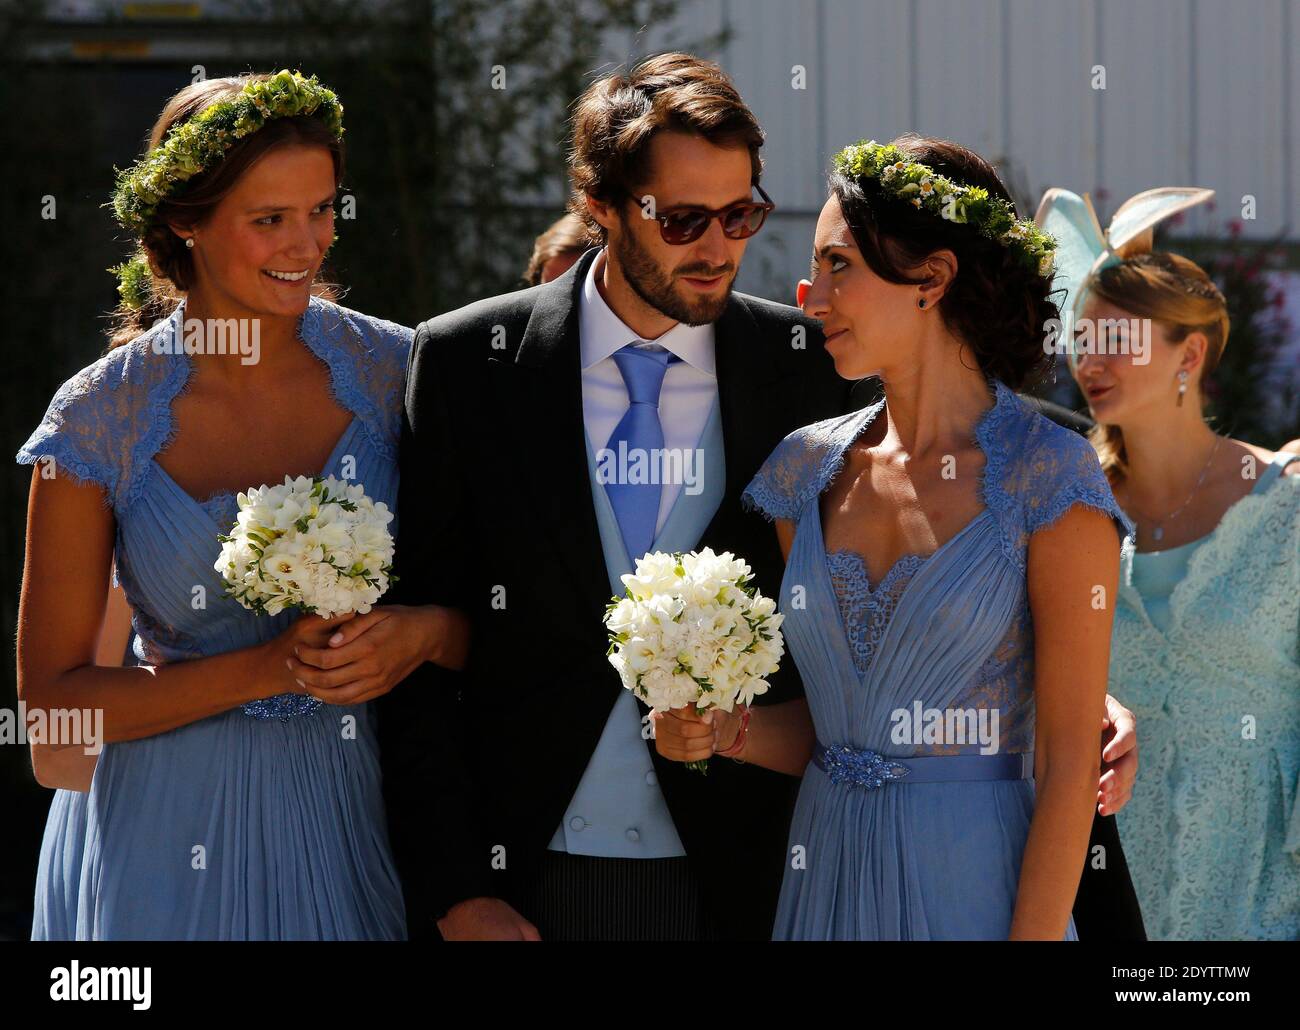 Guests pose after the religious wedding of Prince Felix and Princess Claire of Luxembourg at Sainte-Marie-Madeleine basilica, in Saint-Maximin-la-Sainte-Baume, southern France on September 21, 2013. Photo by ABACAPRESS.COM Stock Photo